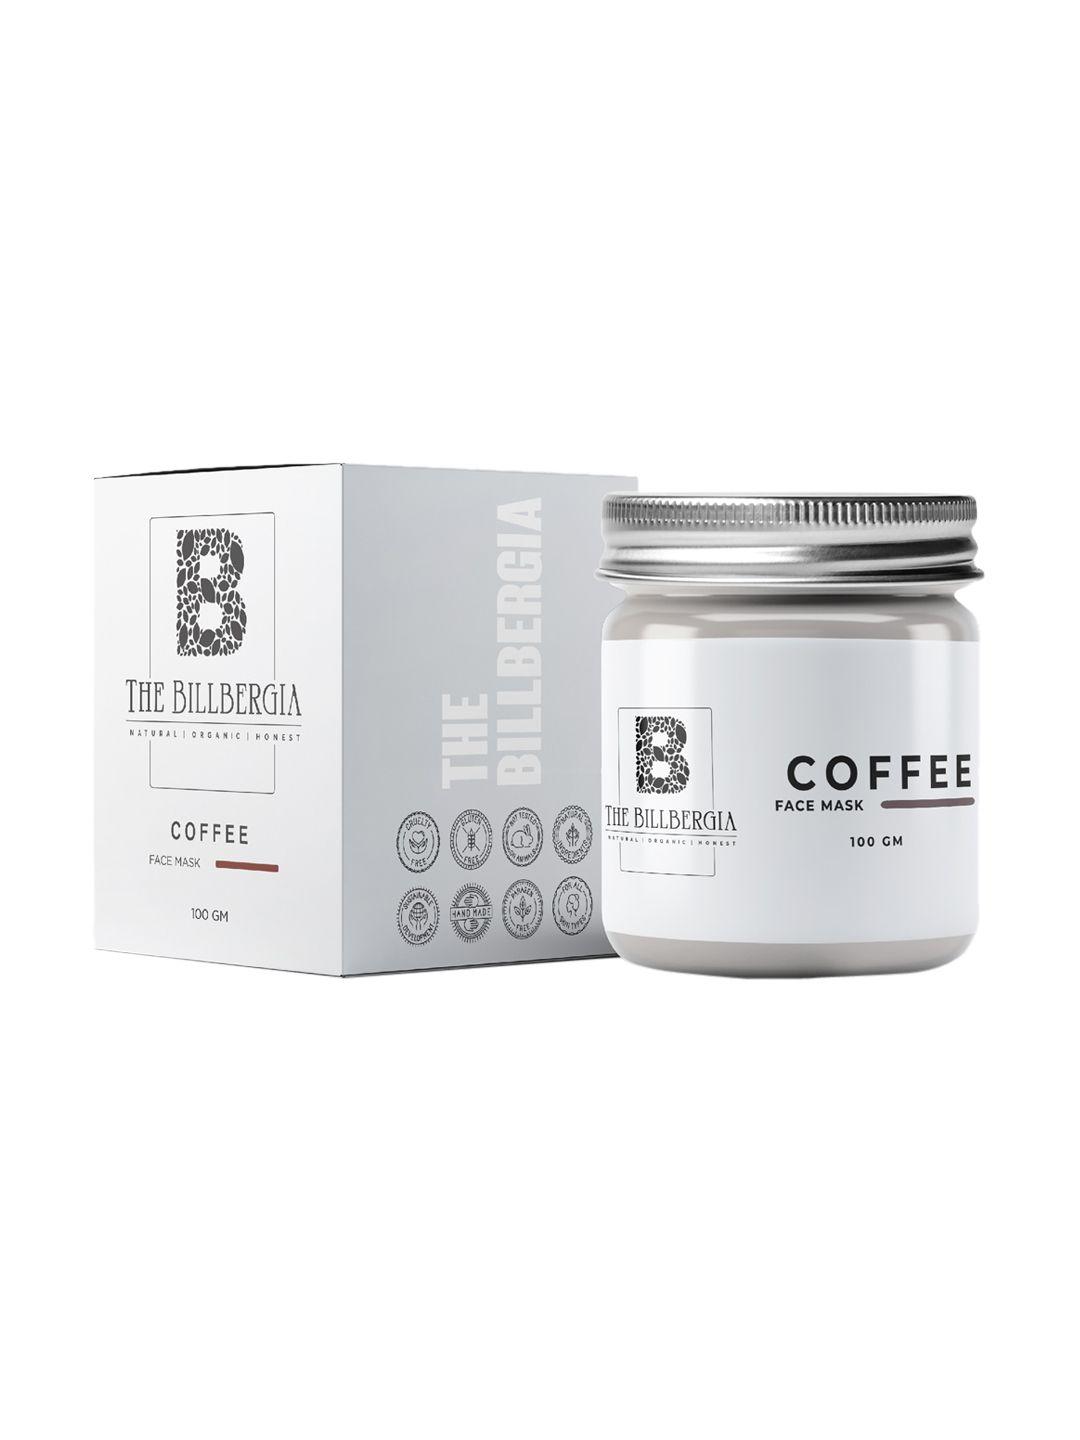 the-billbergia-vegan-coffee-face-mask-for-skin-revival-&-smooth-skin---100-g